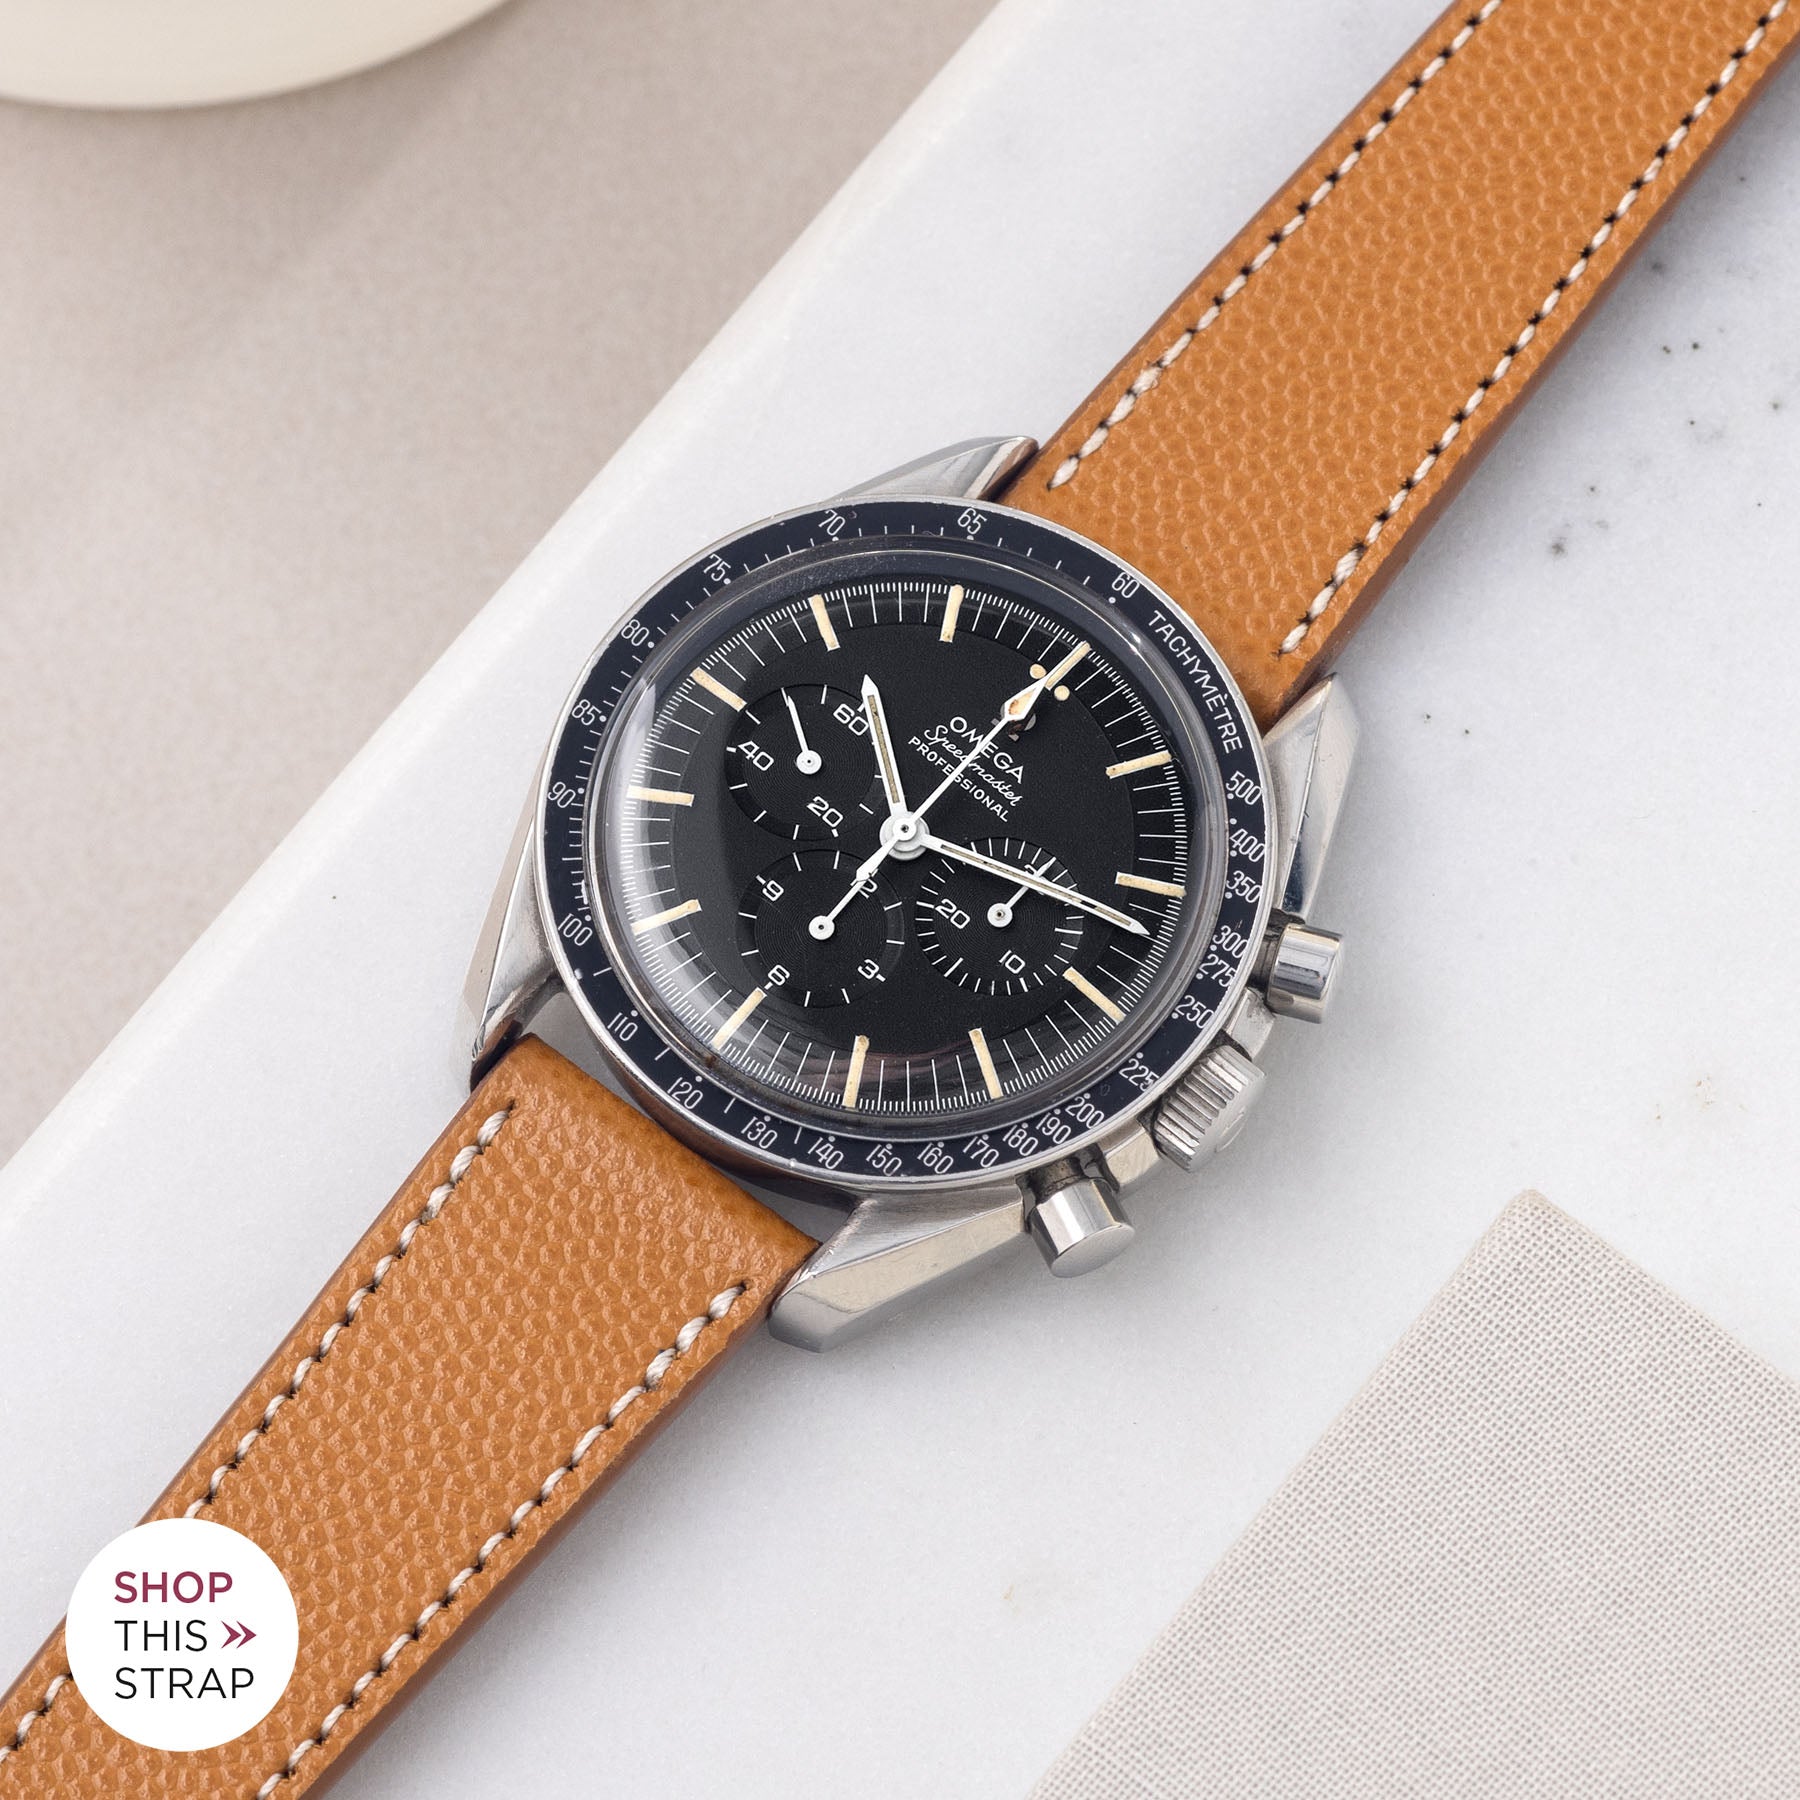 Bulang and Sons_Strapguide_Omega Speedmaster Professional_Pebbled Cognac Brown Leather Watch Strap